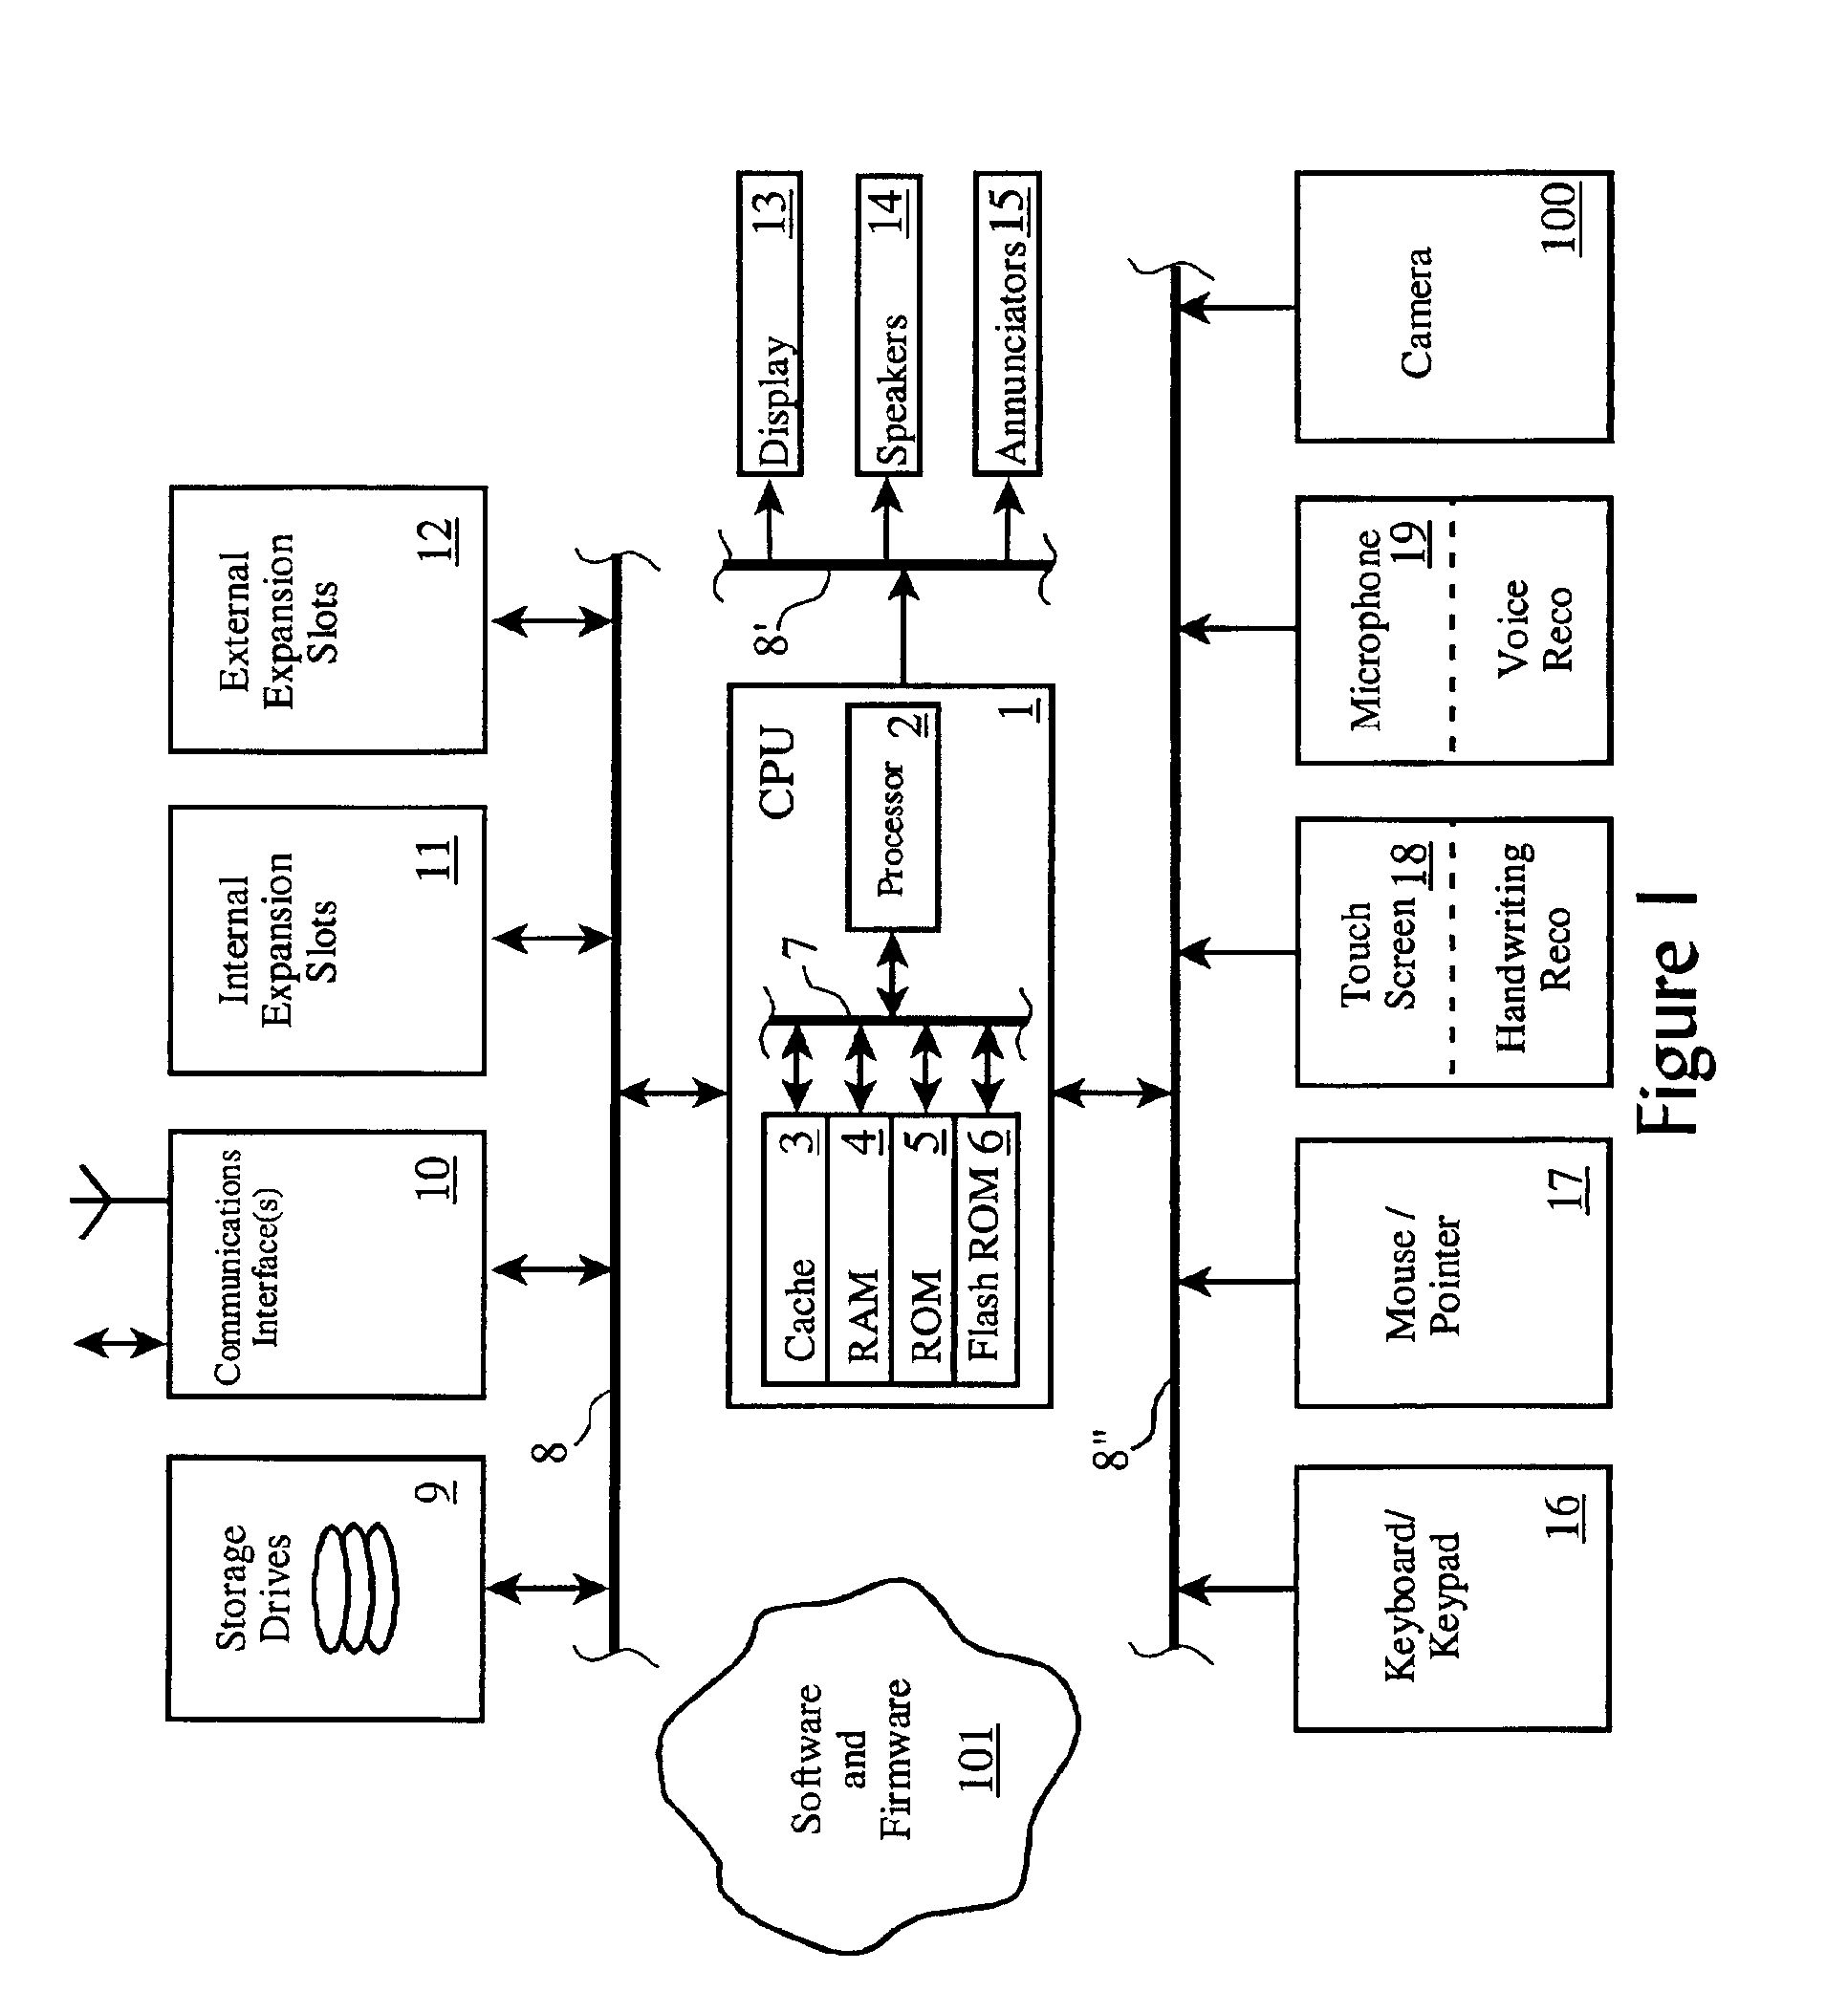 Method and apparatus for reactivation of a system feature by using a programmable reactivation button